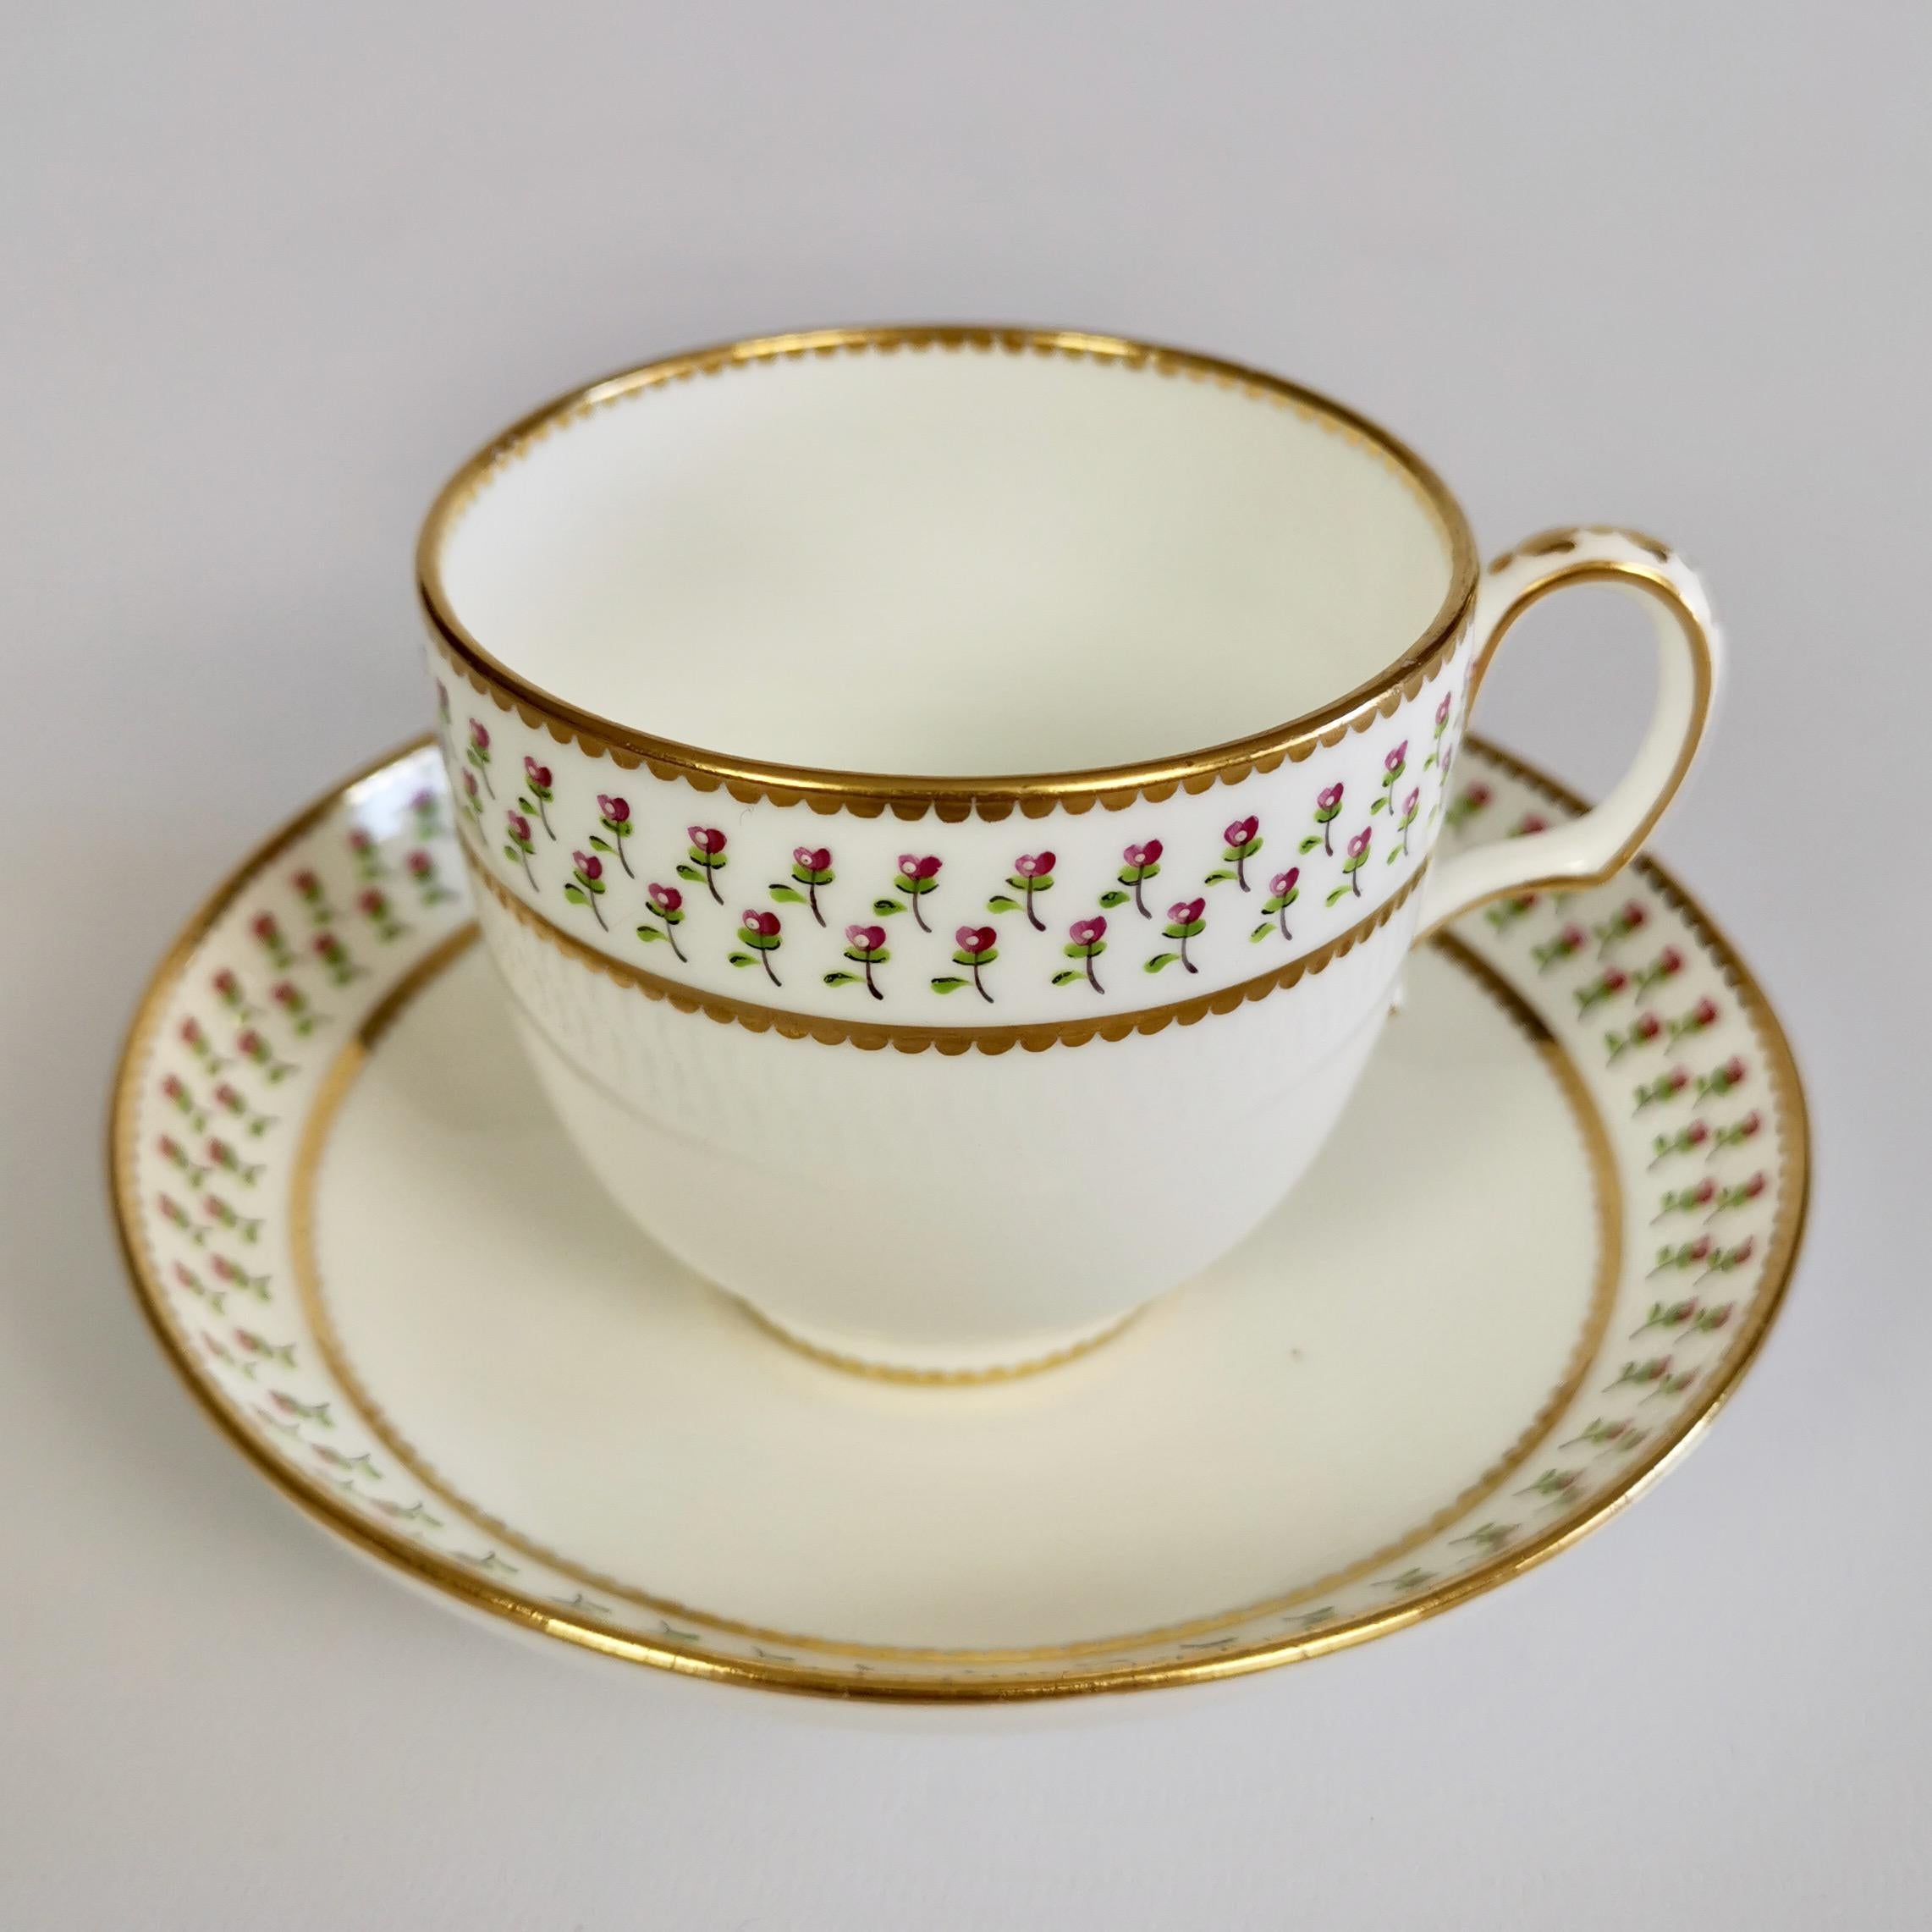 Mid-19th Century Derby King Street Porcelain Teacup Trio, White with Tiny Roses, 1848-1862